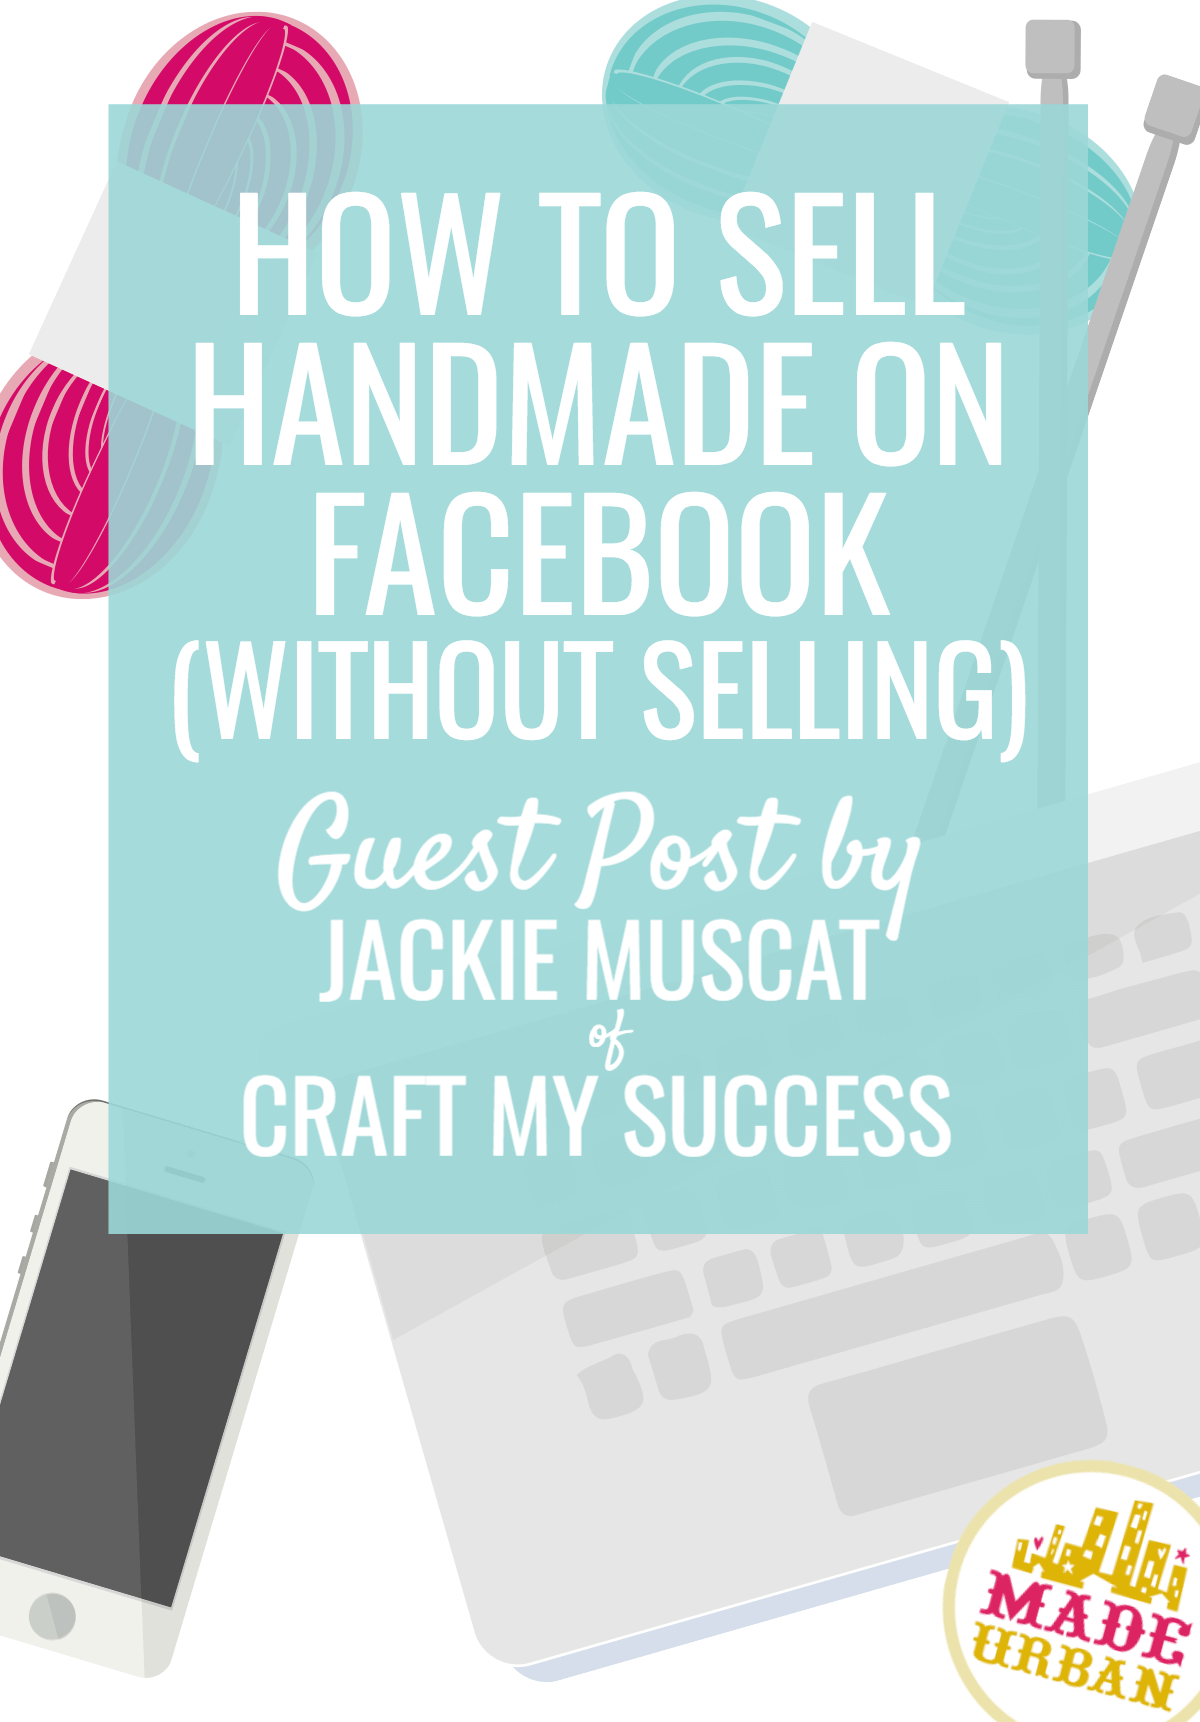 Facebook has over 2 billion users but as a Facebook coach for makers and artists, I know that it’s a struggle to get your posts seen. Here are 4 types of posts that will get your handmade products seen and sold without actually selling